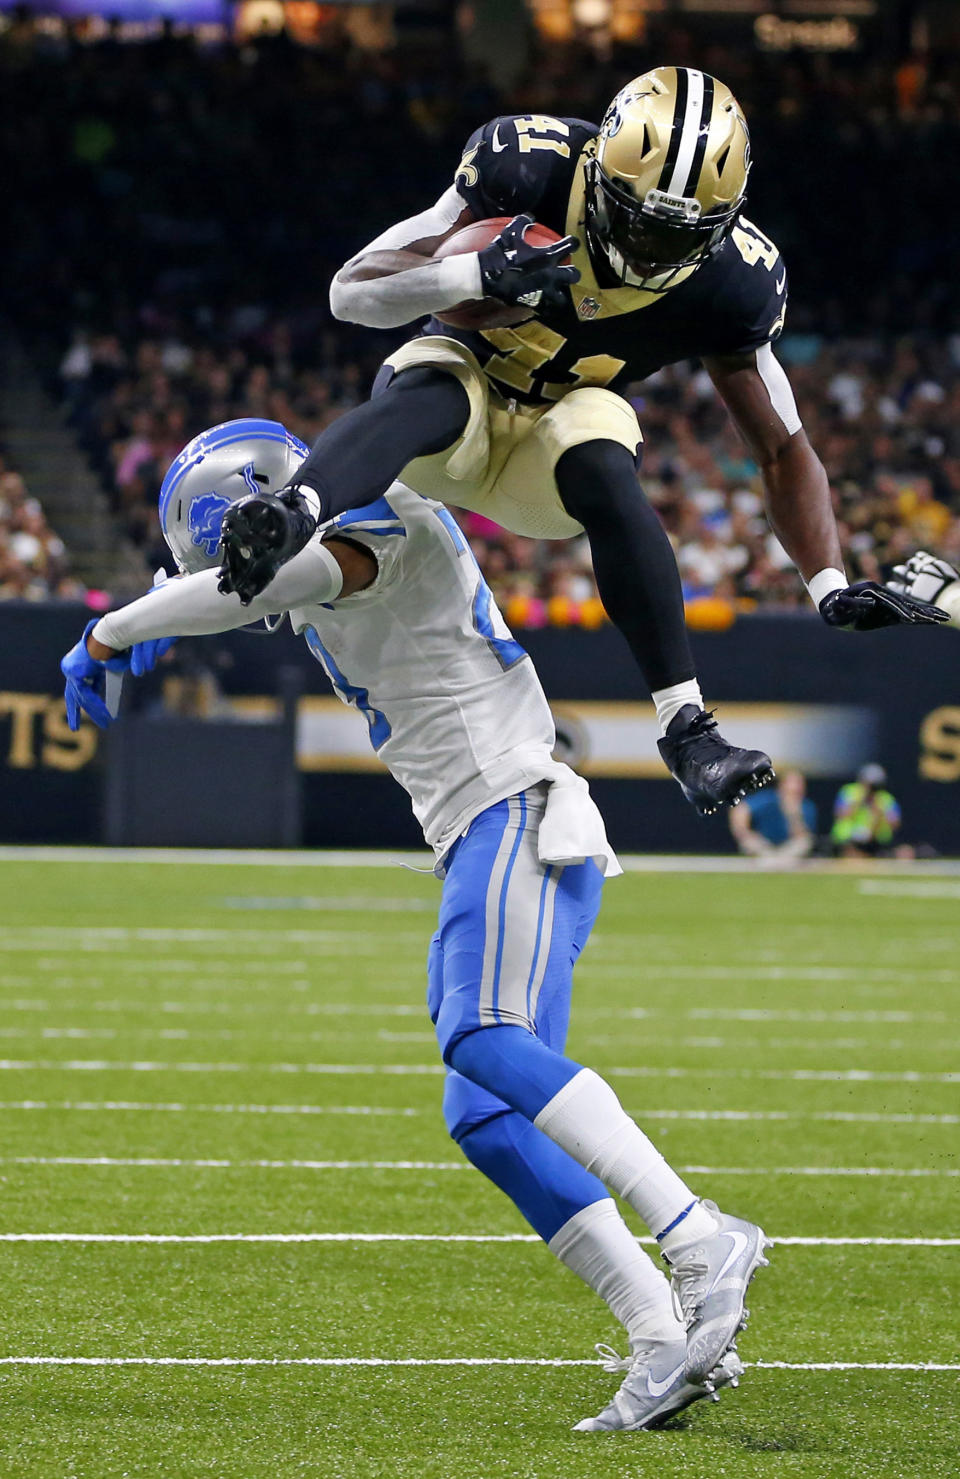 <p>New Orleans Saints running back Alvin Kamara (41) leaps over Detroit Lions cornerback Darius Slay in the second half of an NFL football game in New Orleans, Sunday, Oct. 15, 2017. (AP Photo/Butch Dill) </p>